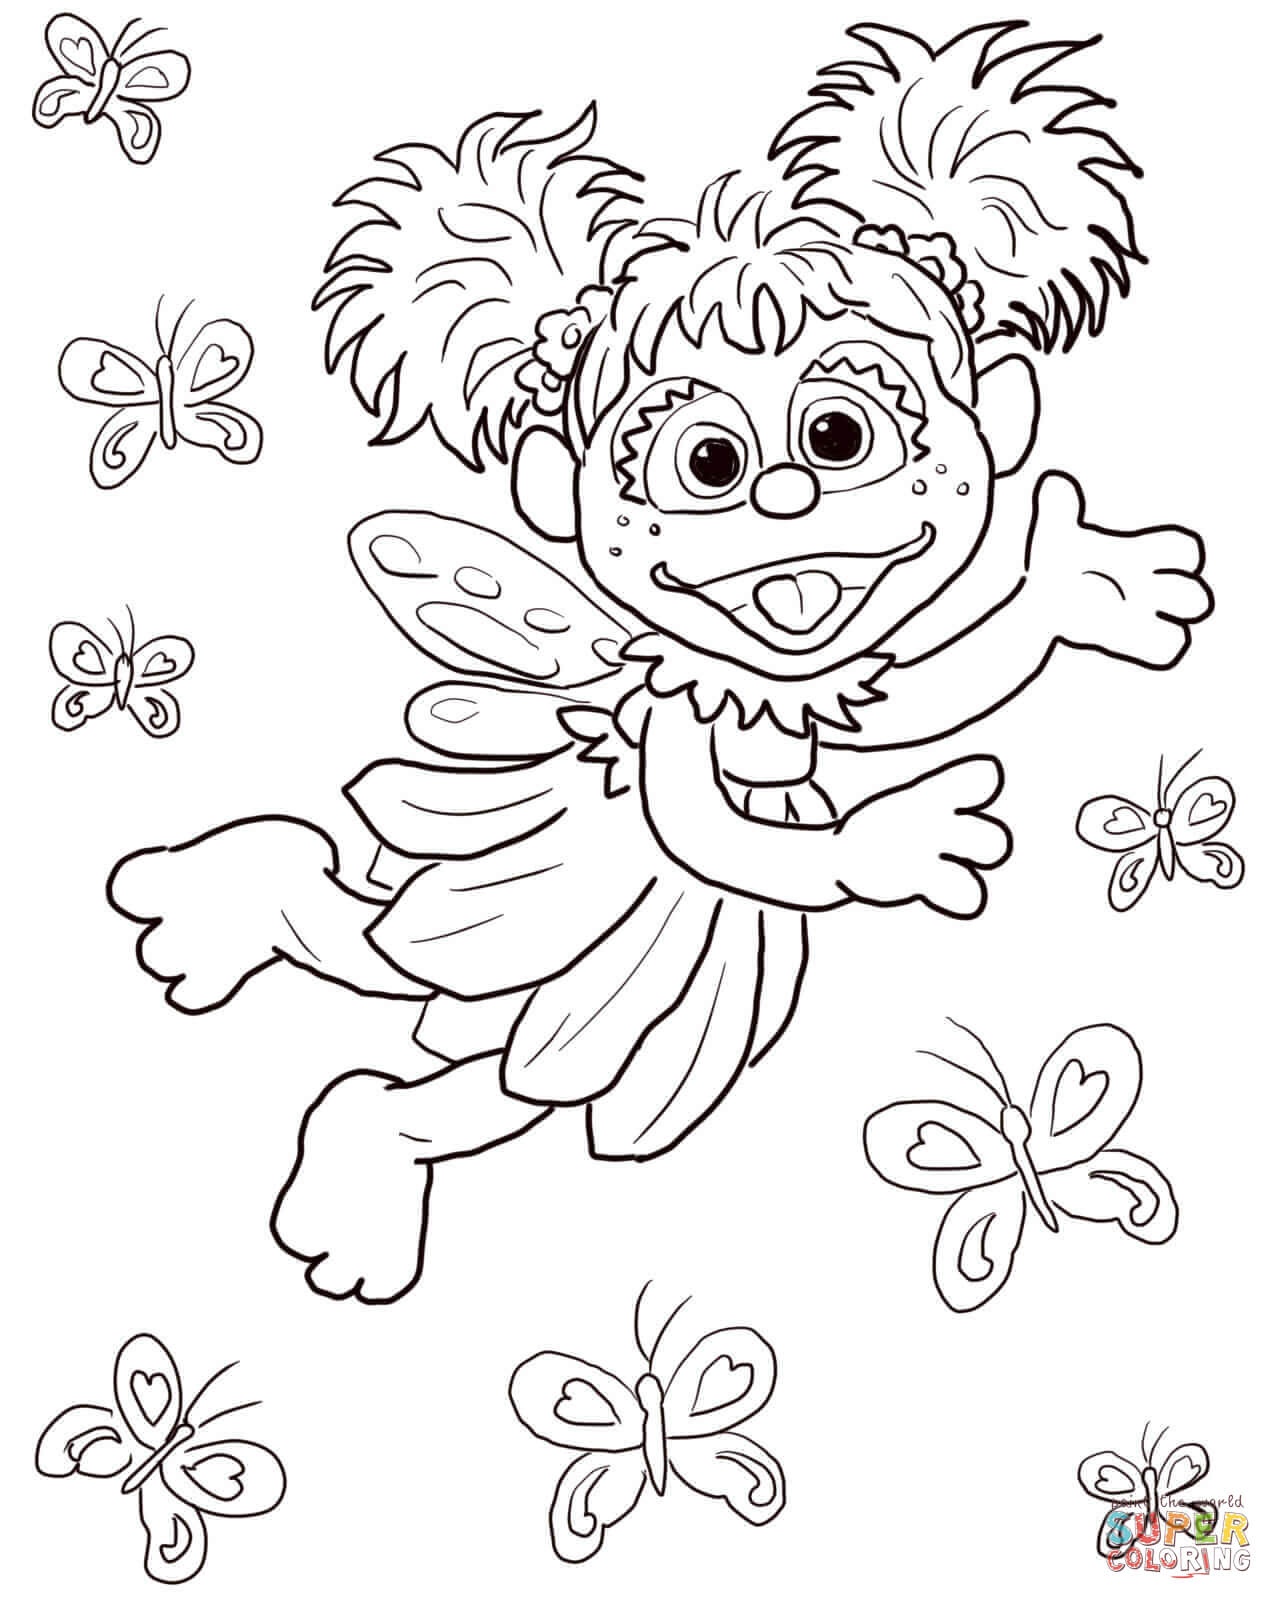 Sesame Street Coloring Pages | Free Coloring Pages - Free Printable Coloring Pages Sesame Street Characters